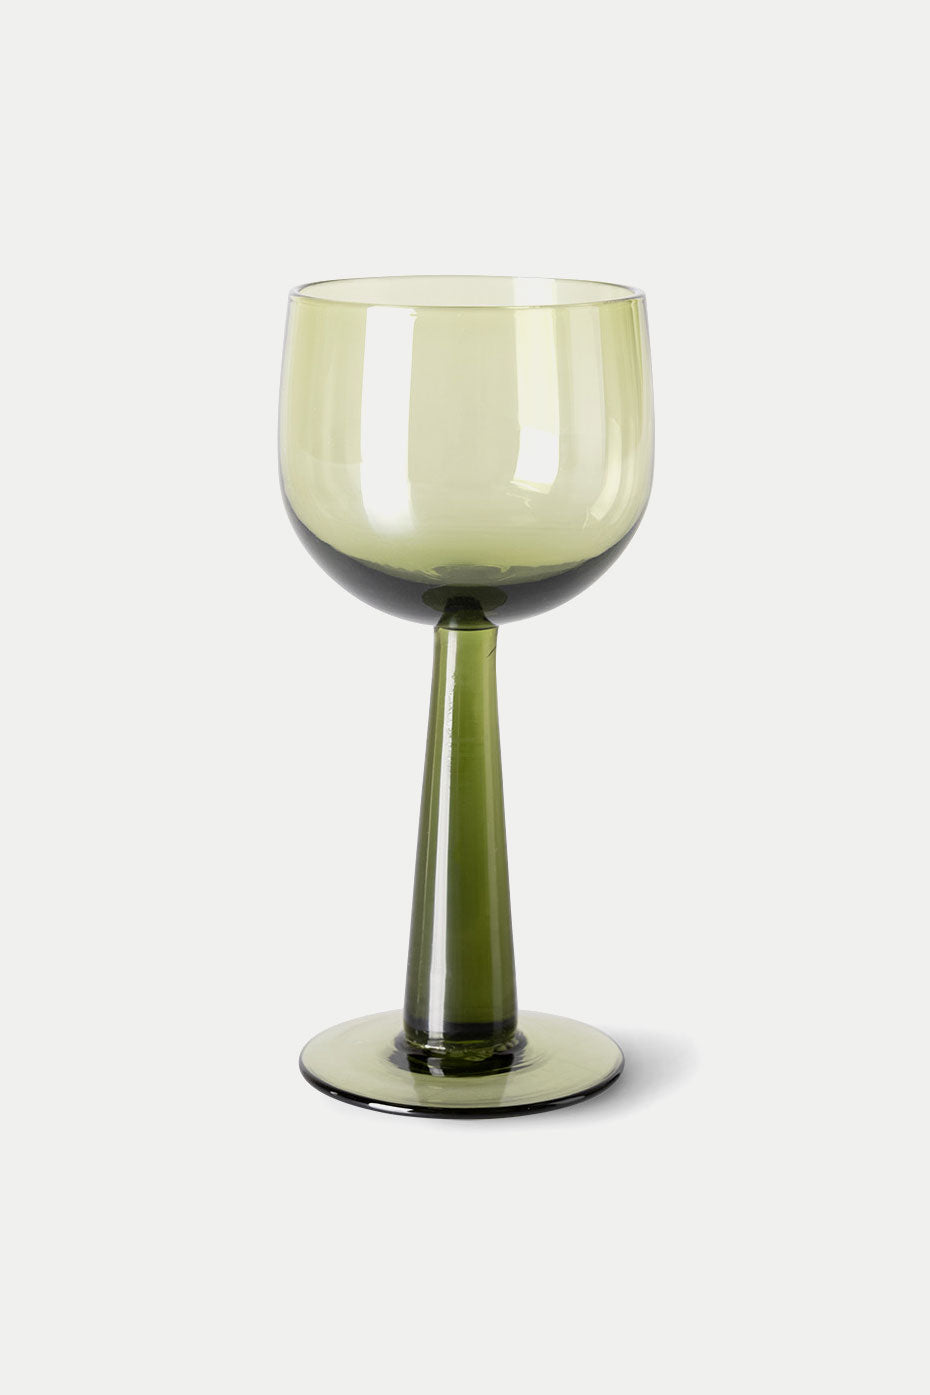 HK Living Olive Green The Emeralds Wine Glass Tall